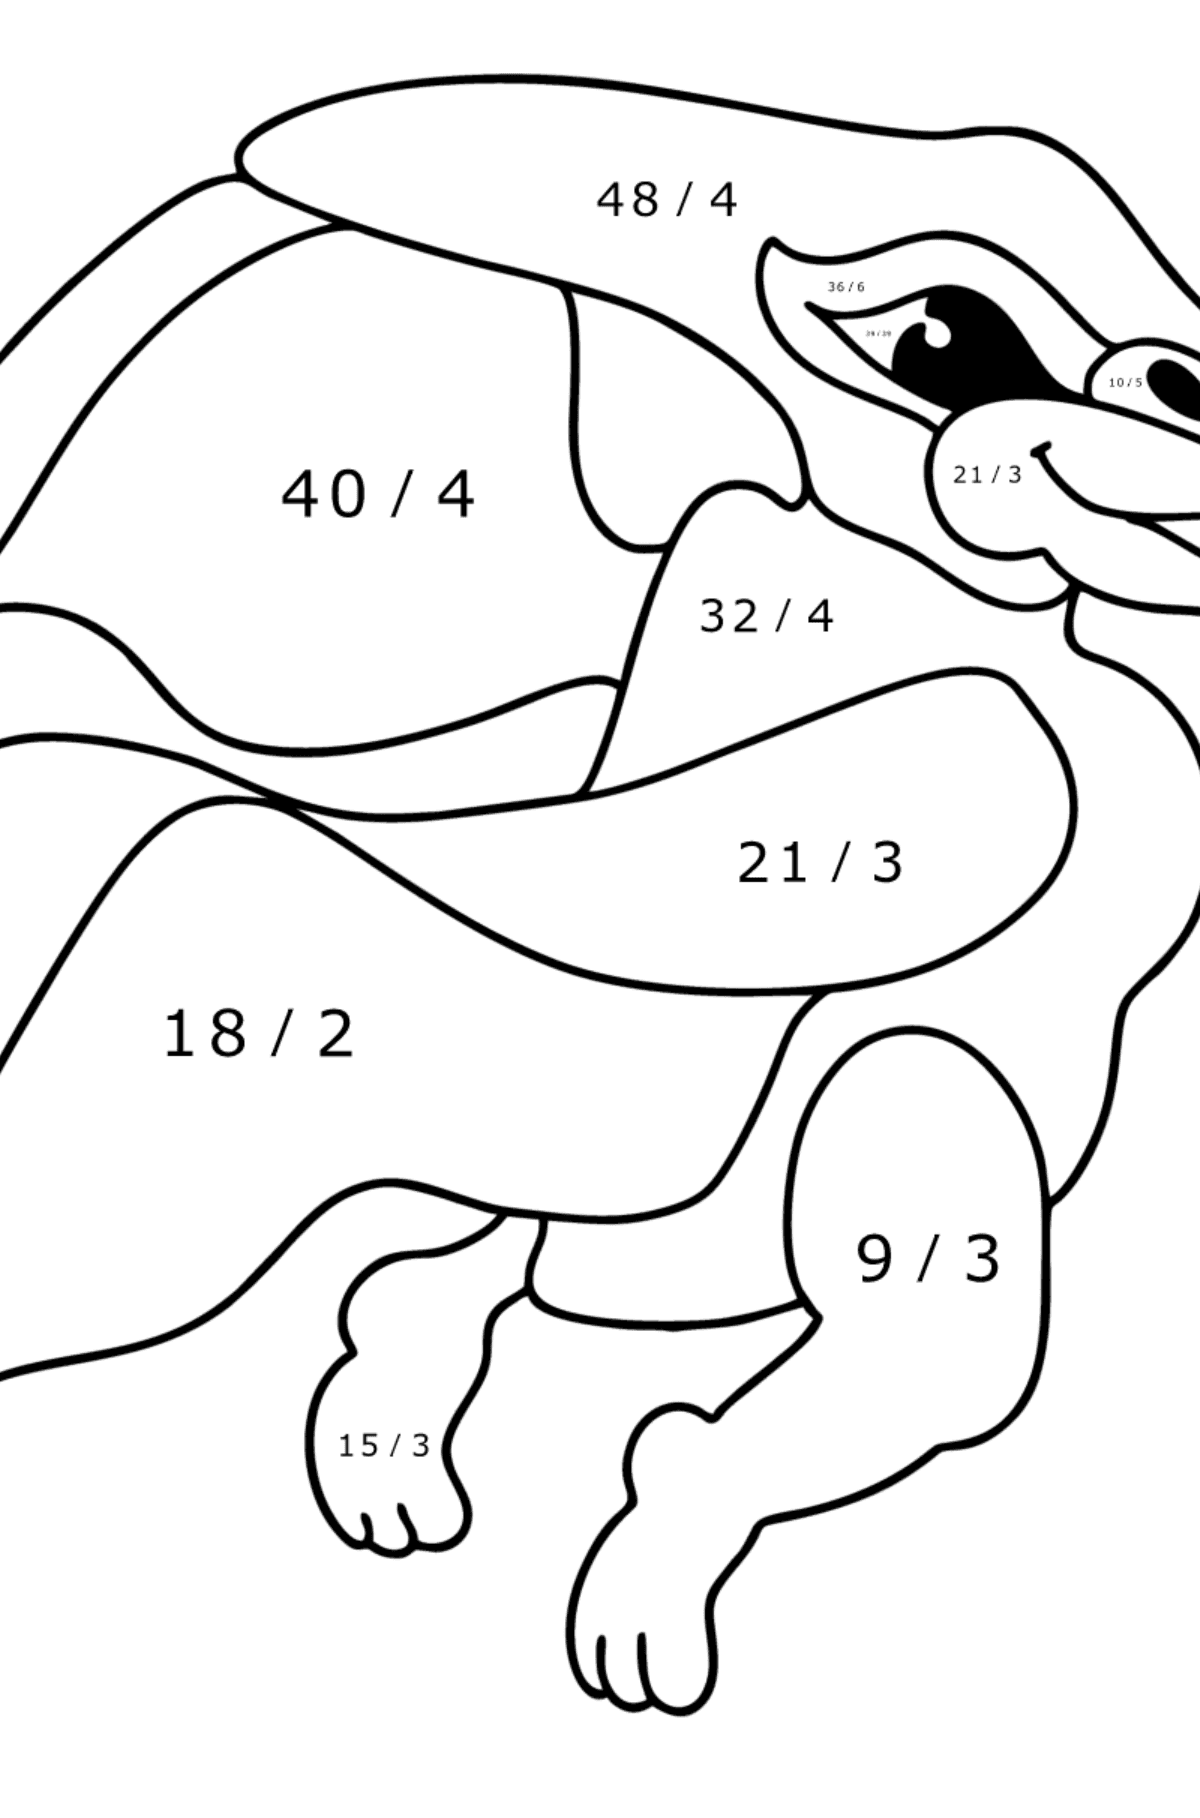 Pteranodon coloring page - Math Coloring - Division for Kids